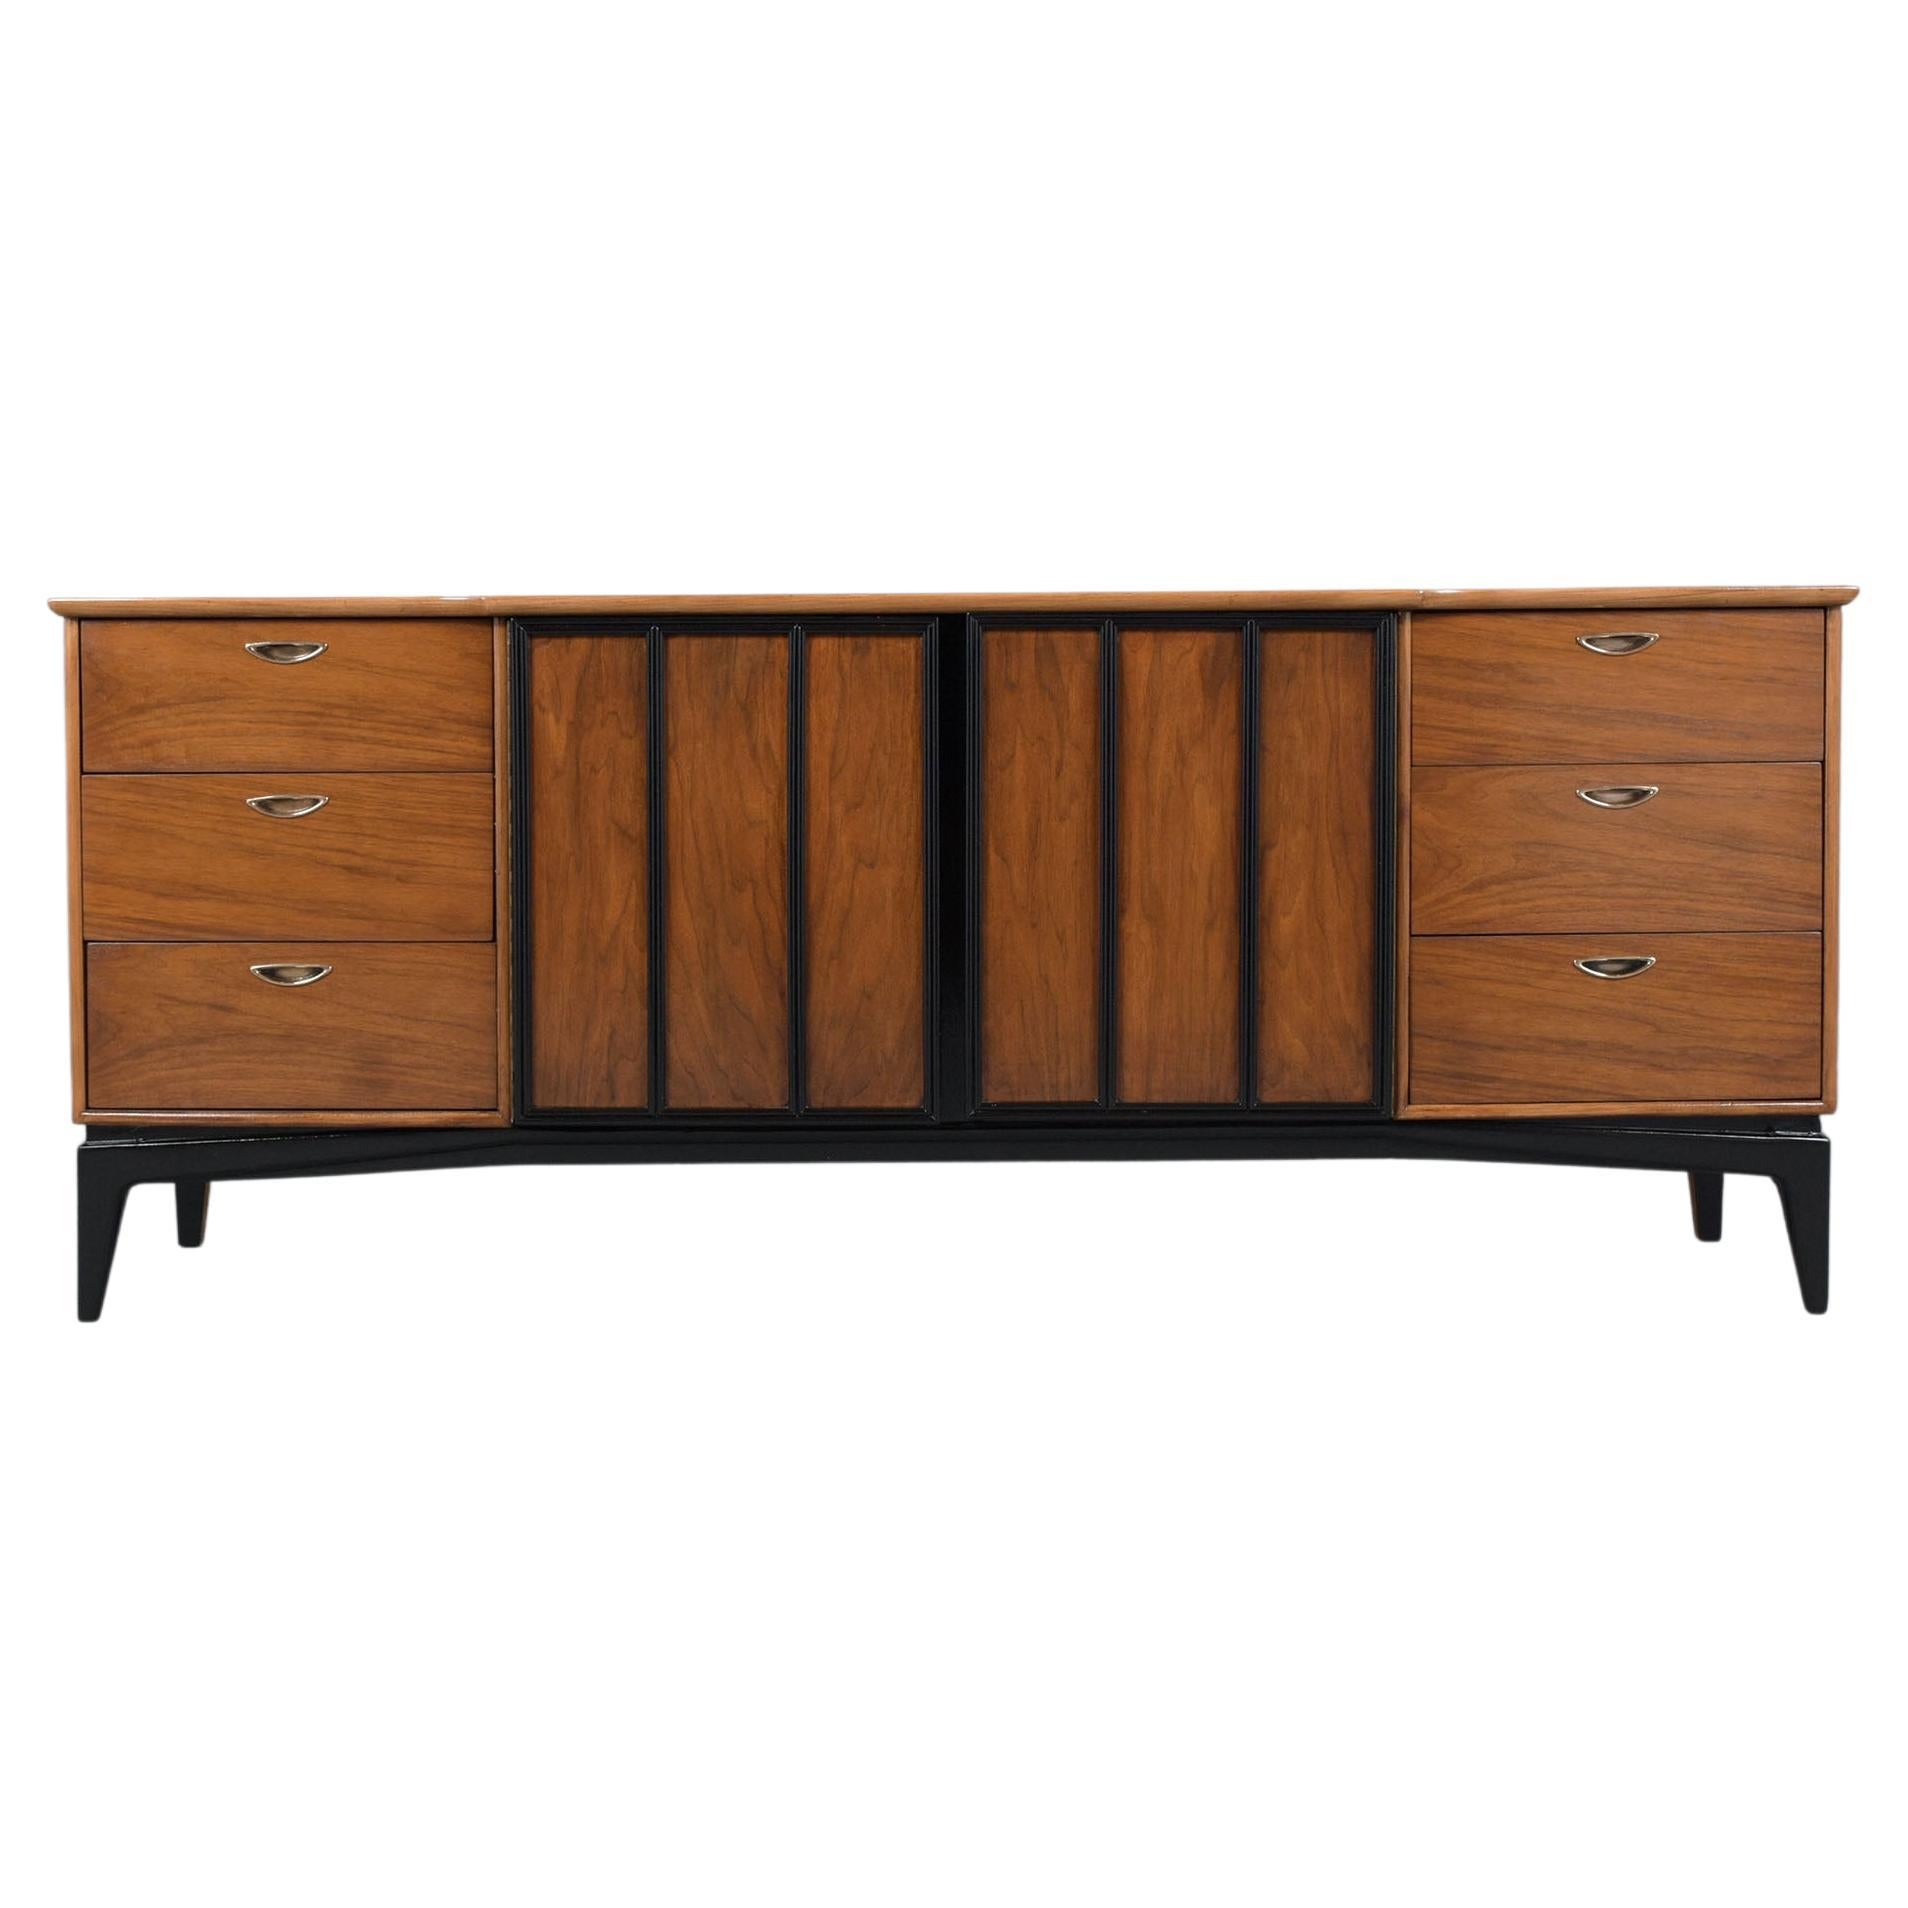 Discover the allure of our Mid-Century Modern Walnut Credenza, a stunning piece meticulously restored by our expert craftsmen. Crafted from high-quality walnut wood, this credenza has been fully restored, stripped, and re-stained in a walnut and